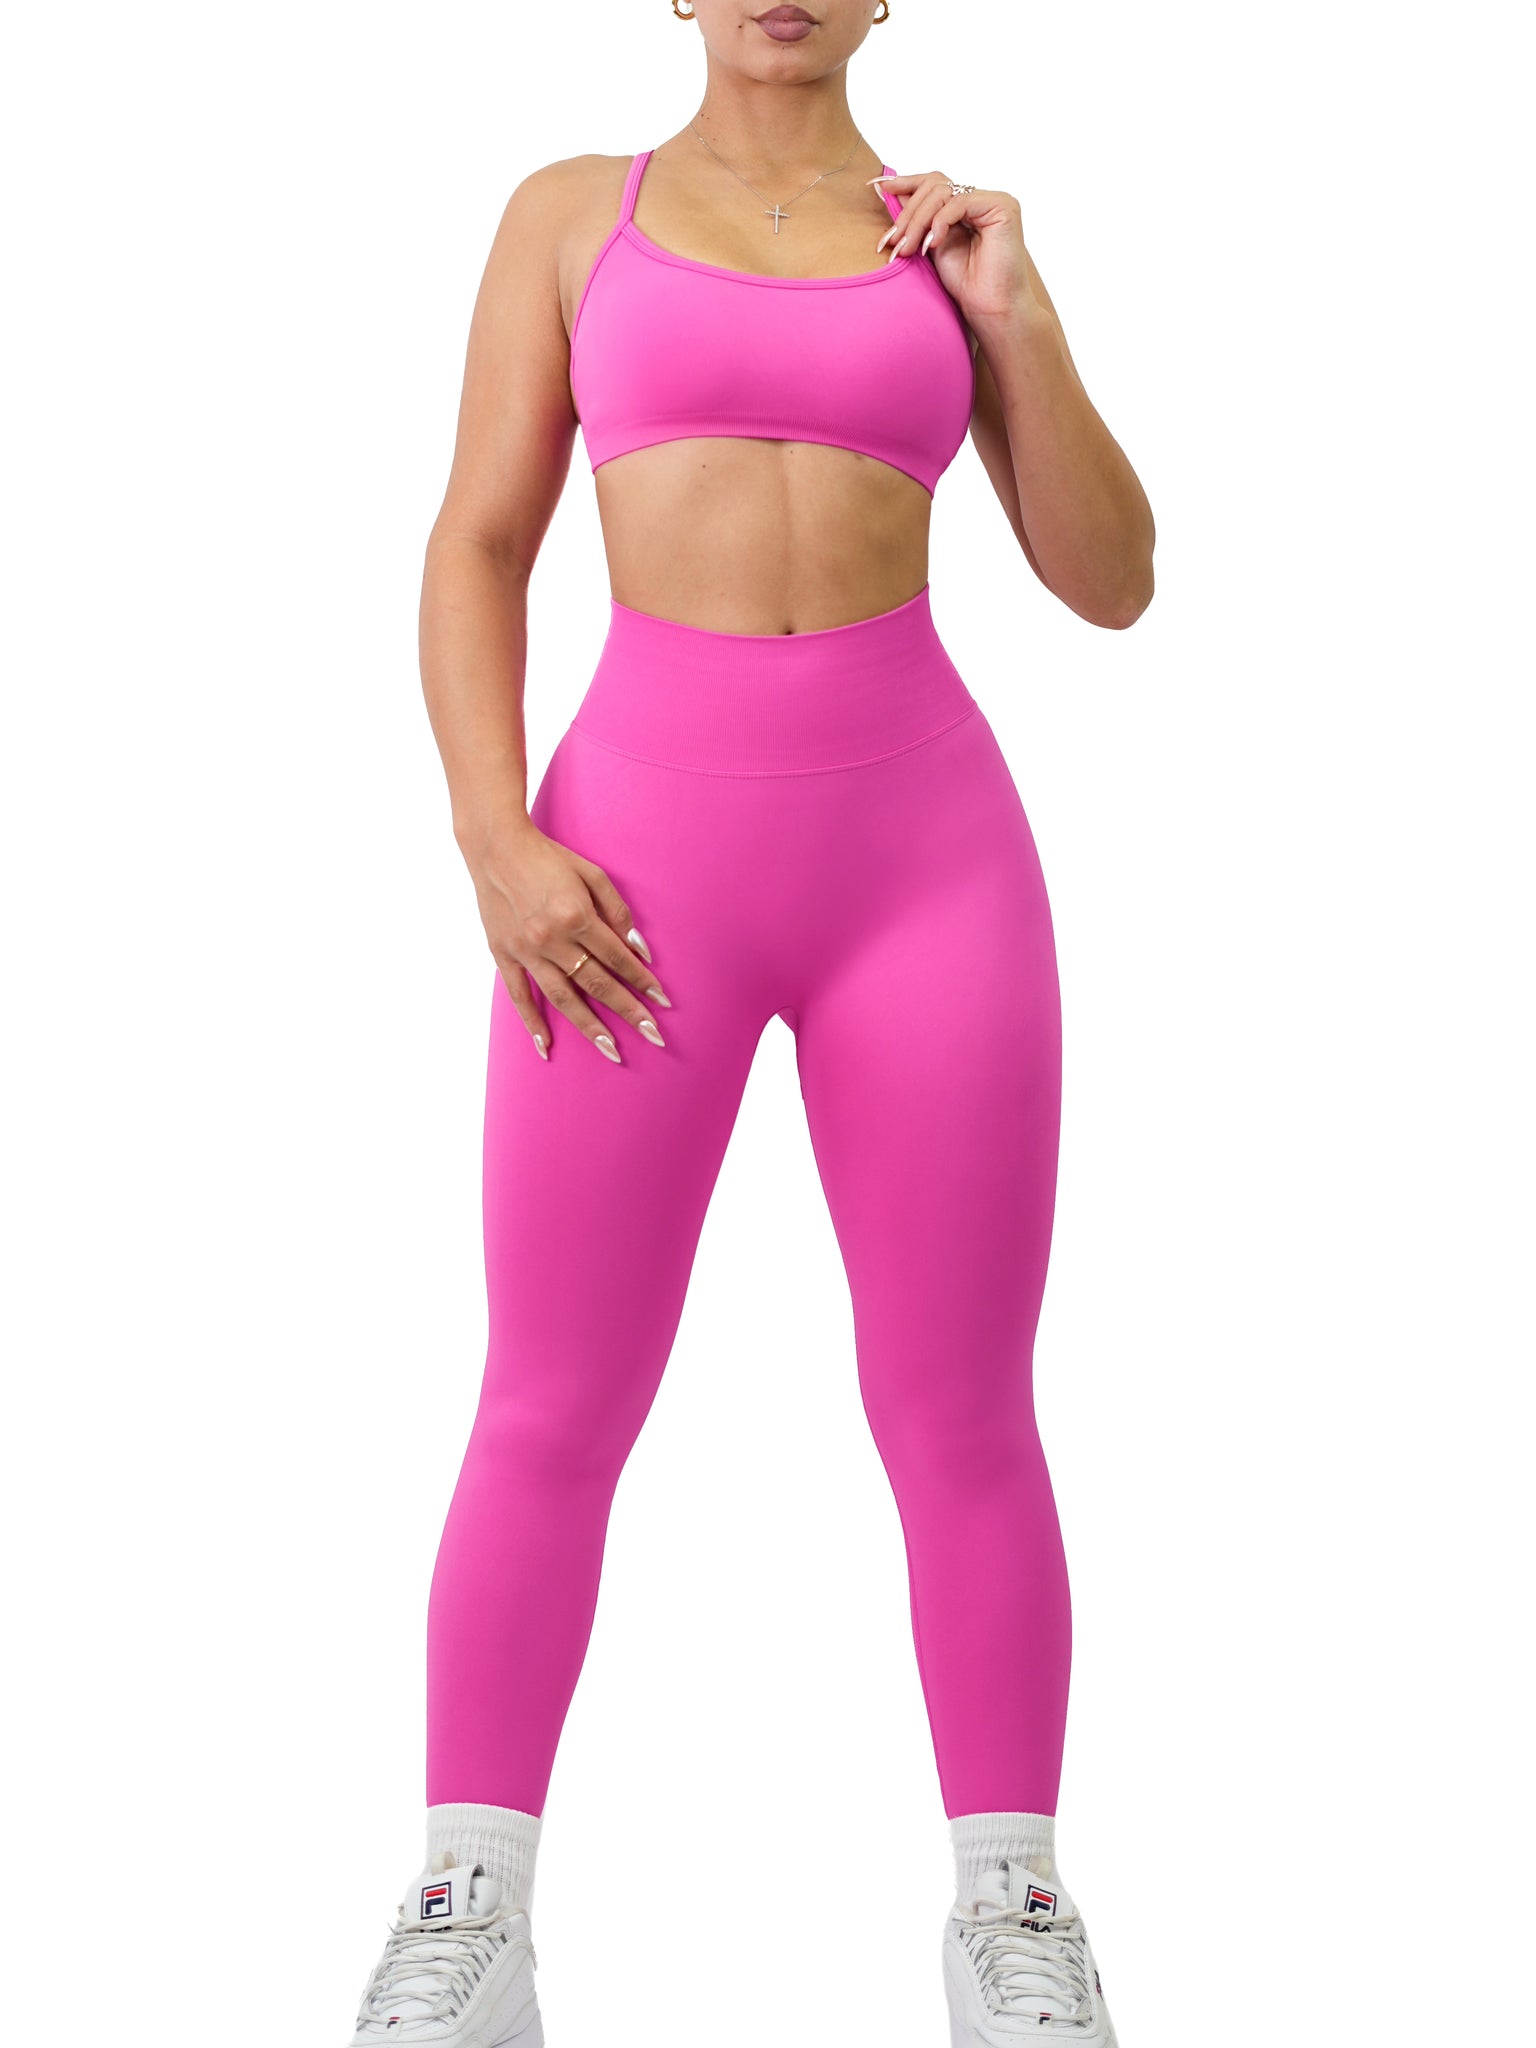 Athletic Seamless Leggings (Hot Pink) – Fitness Fashioness